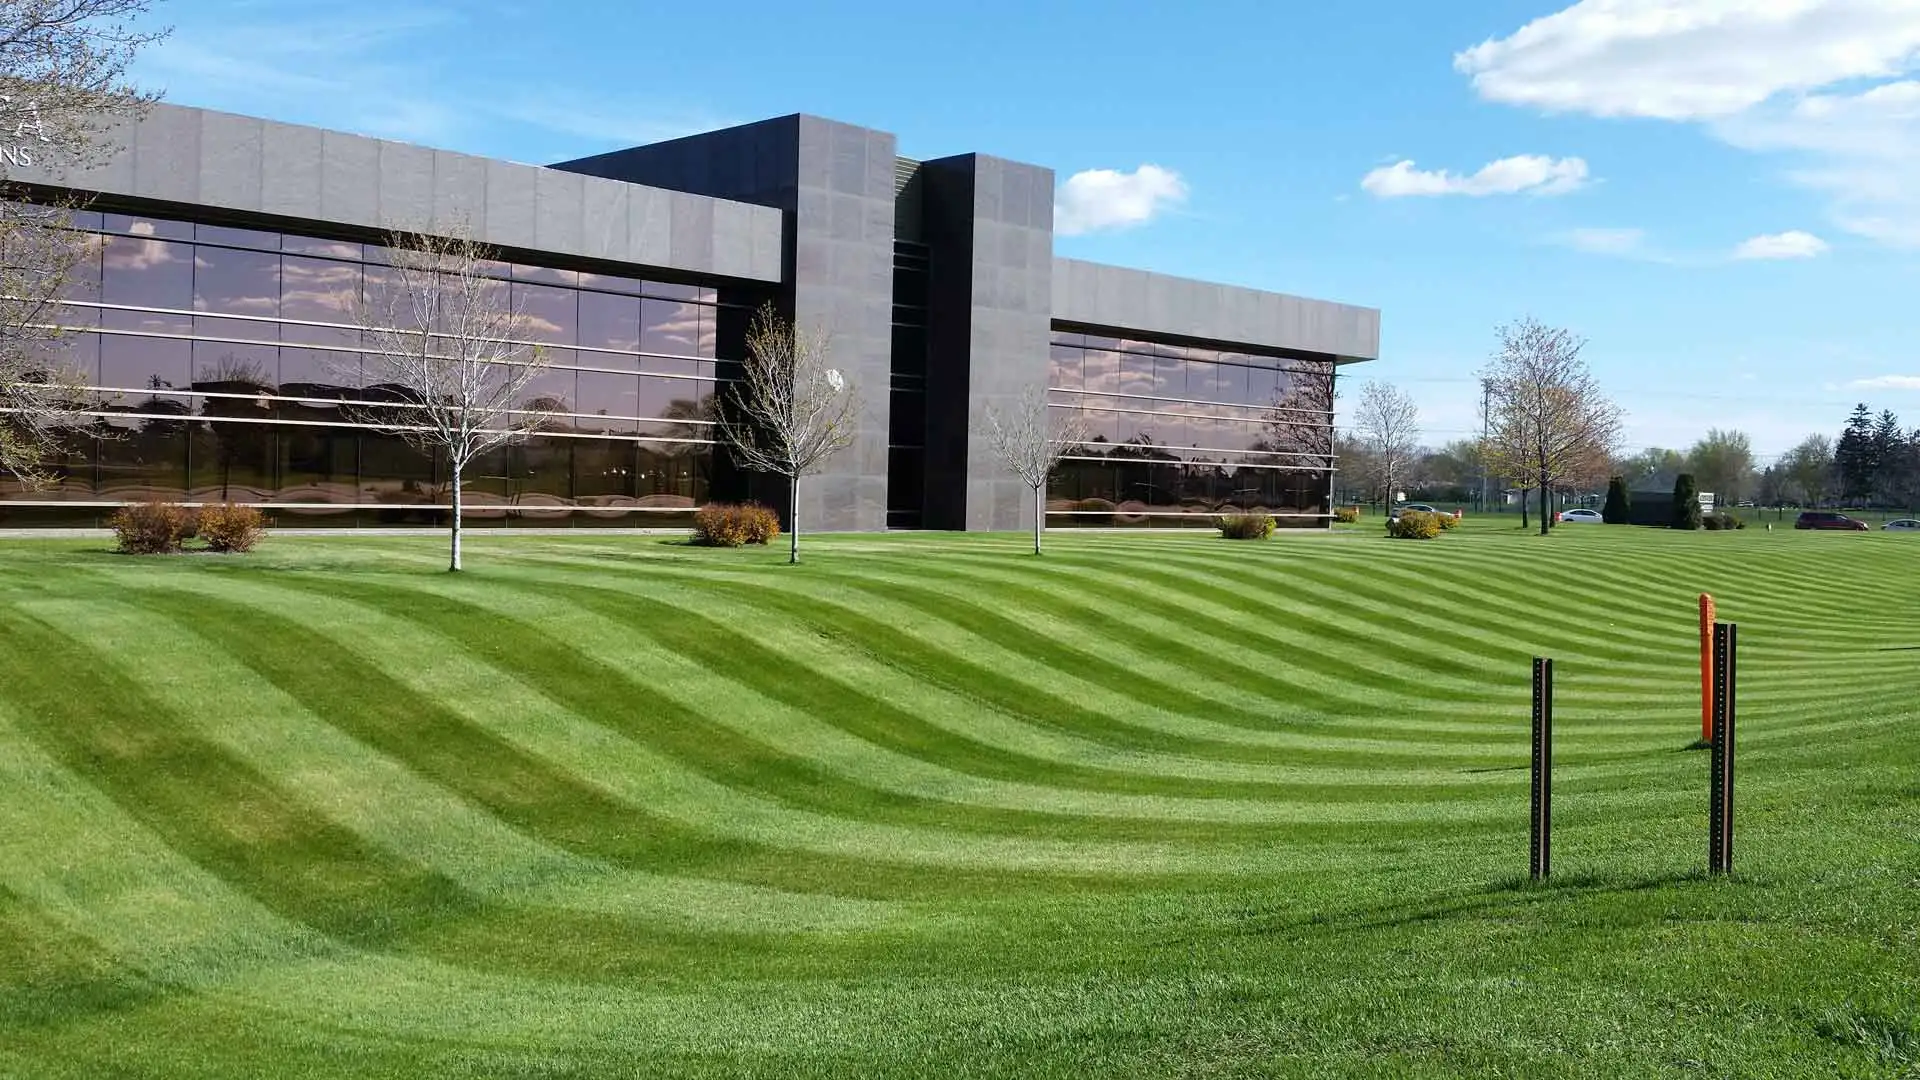 Commercial property in Sartell that is mowed regularly and receives proper fertilization.